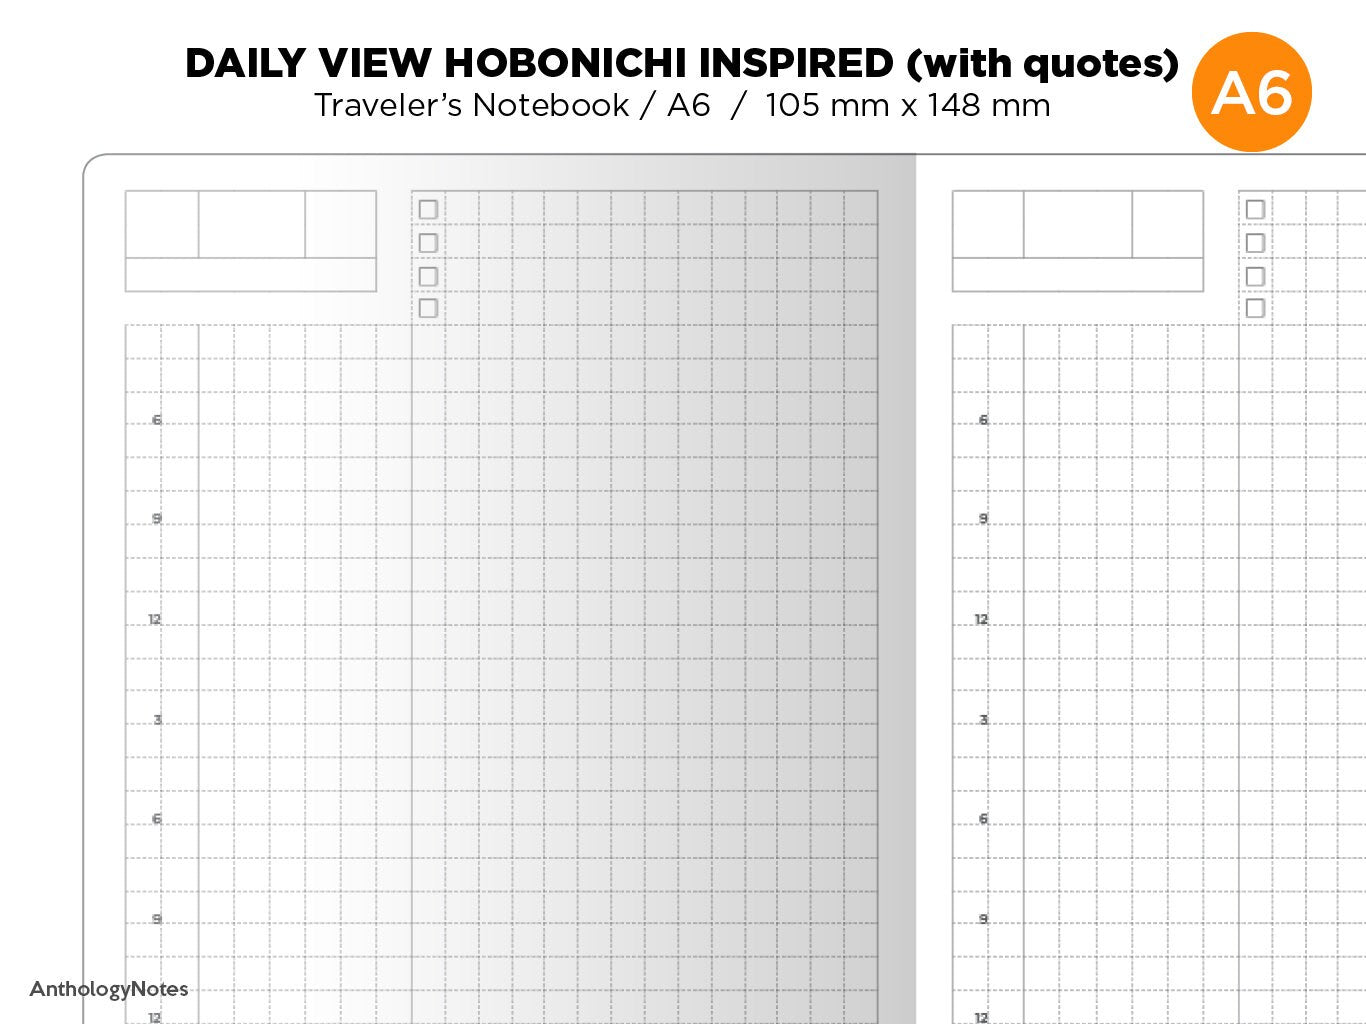 Hobonichi TN Insert - A6 Size - Traveler's Notebook Printable - Do1P - Minimalist - Daily View - With Quotes Section